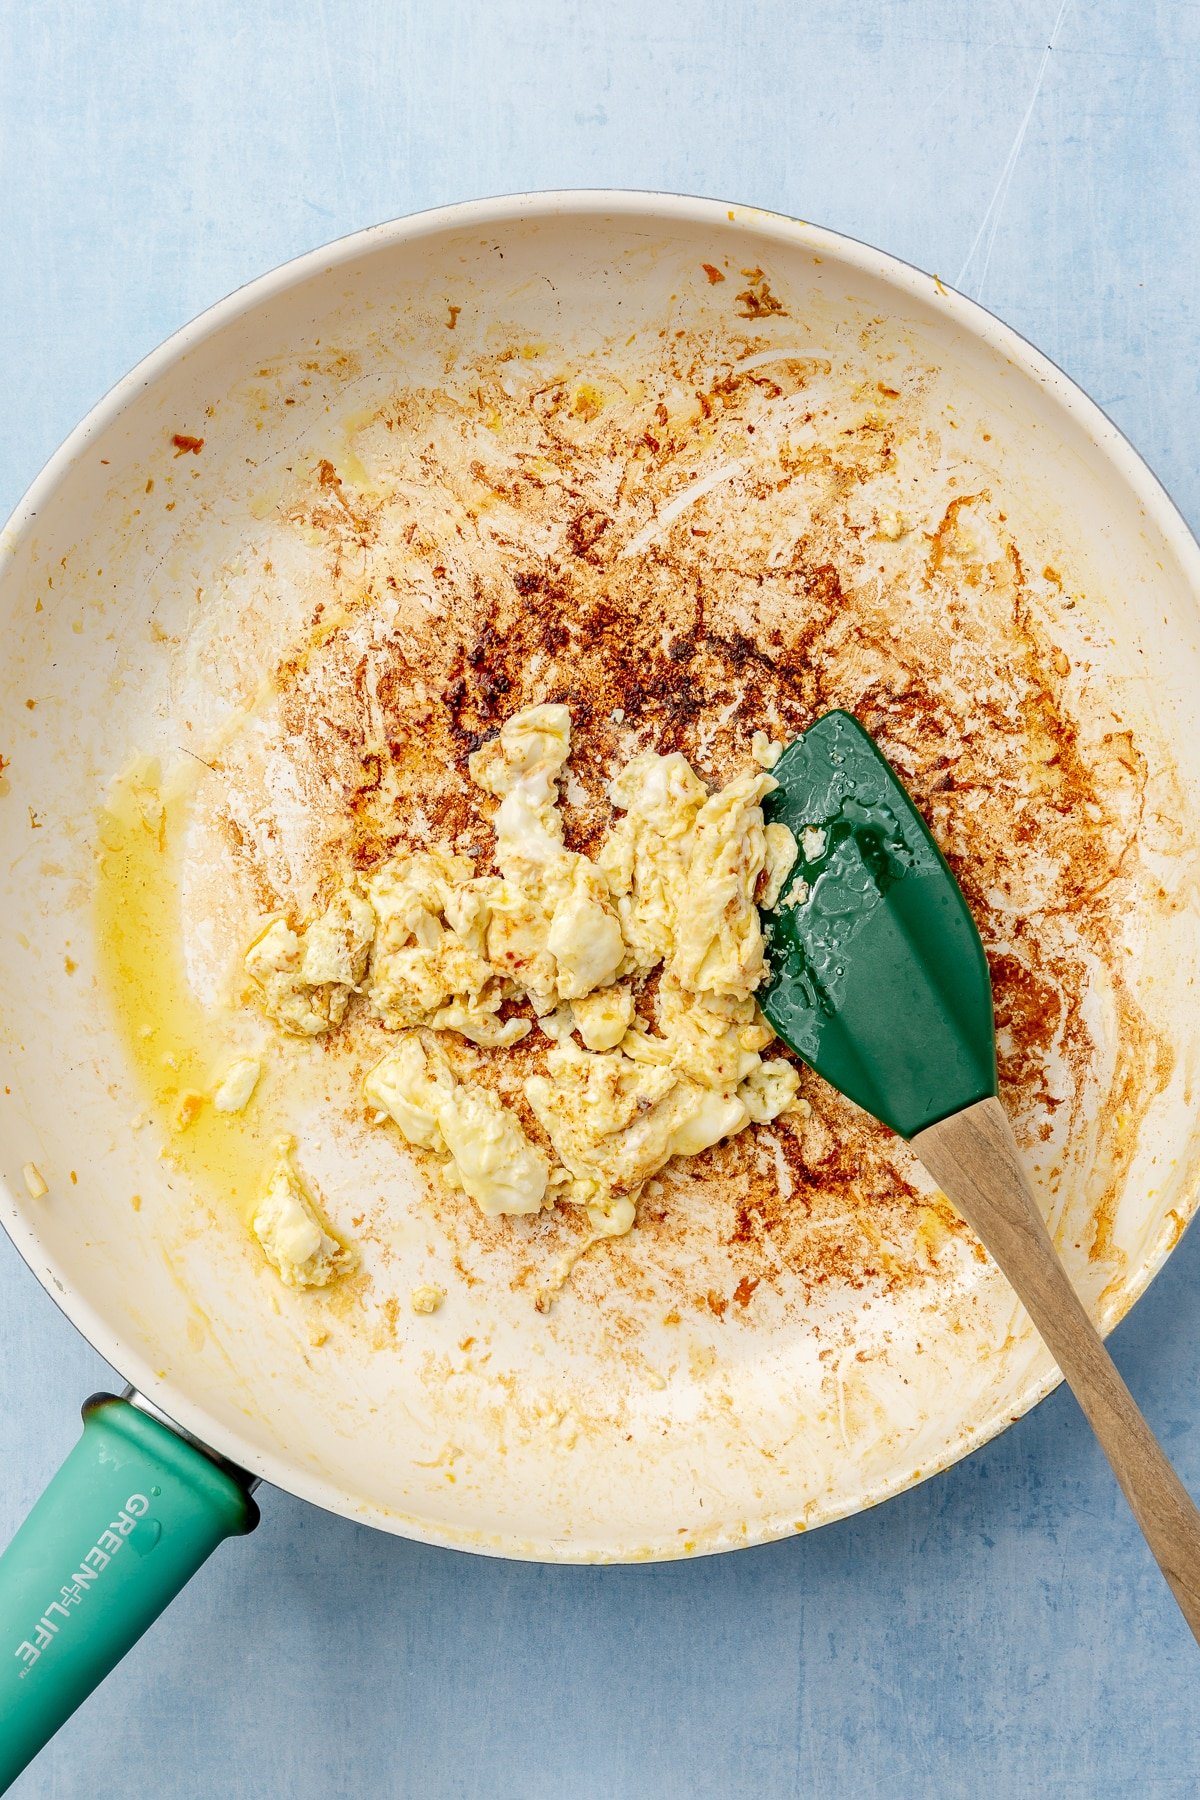 Egg has been scrambled in a frying pan with a teal handle. A green spatula sits on the side.